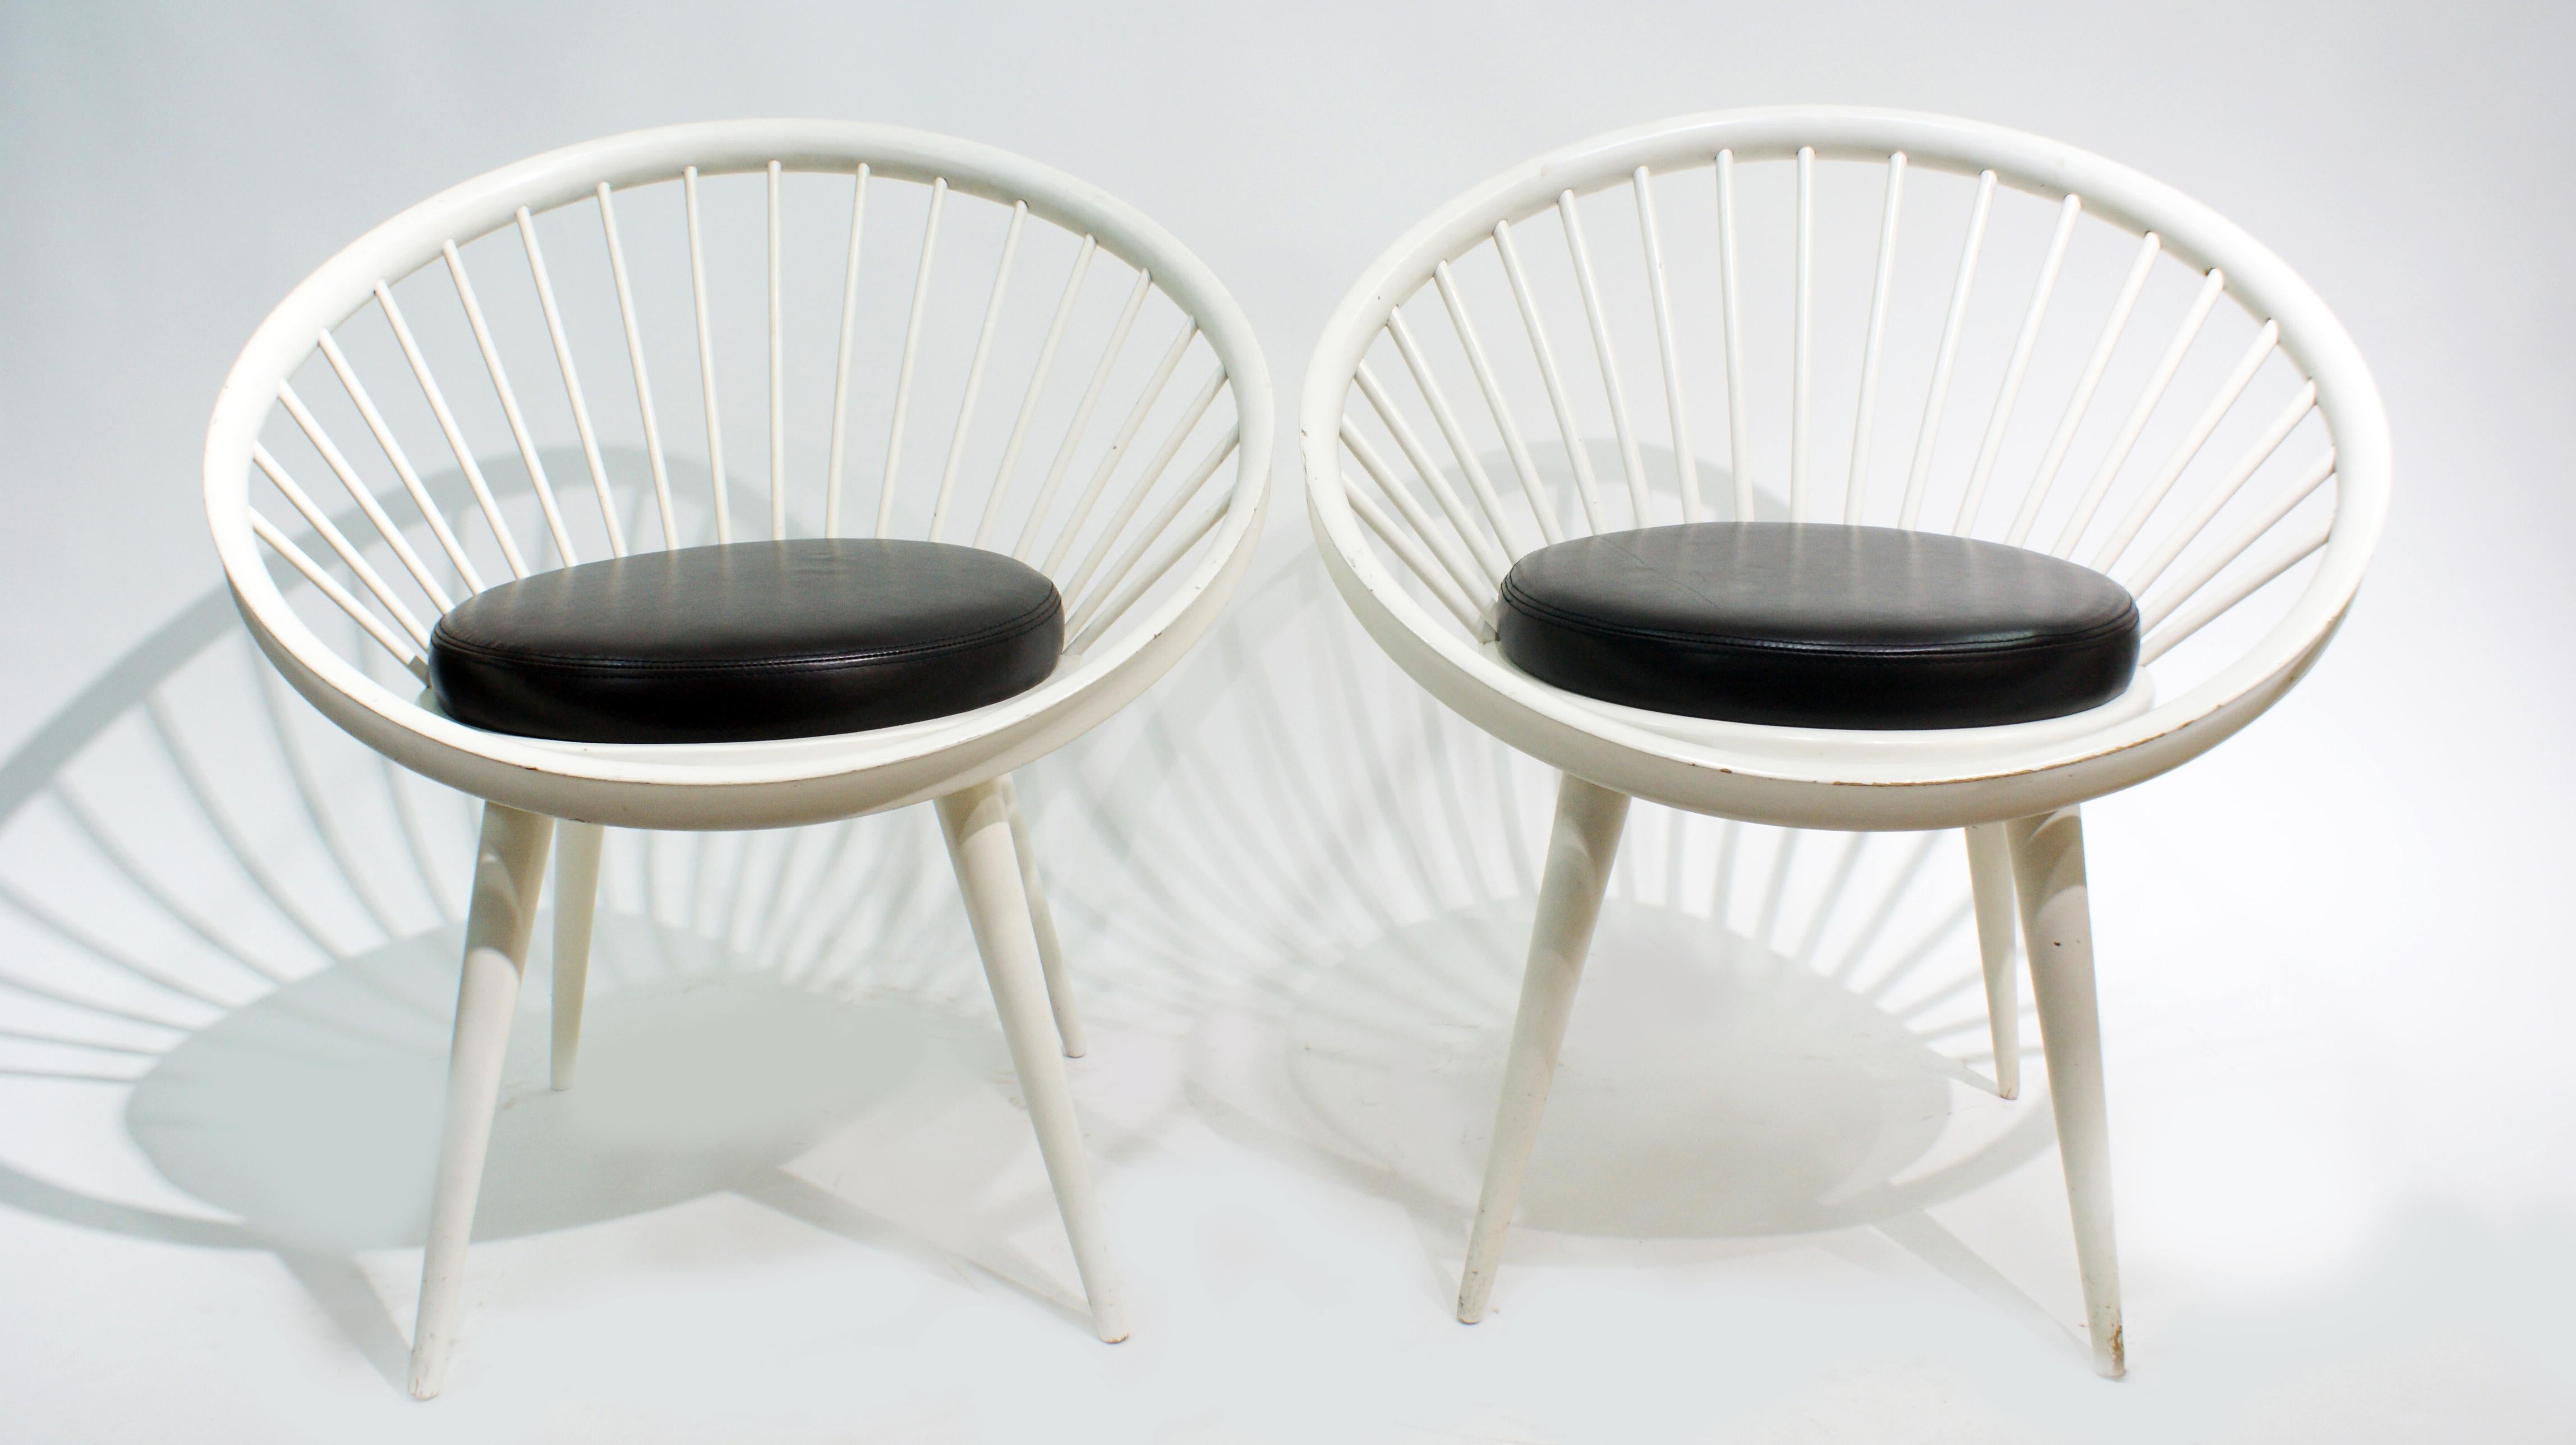 Pair of midcentury circle lounge chairs by Yngve Ekström for Swedese, circa 1960.
The chairs features dark brown leather seats with white lacquered beechwood structure.
Yngve Ekström (1913-1988) was an architect, woodworker, and furniture designer